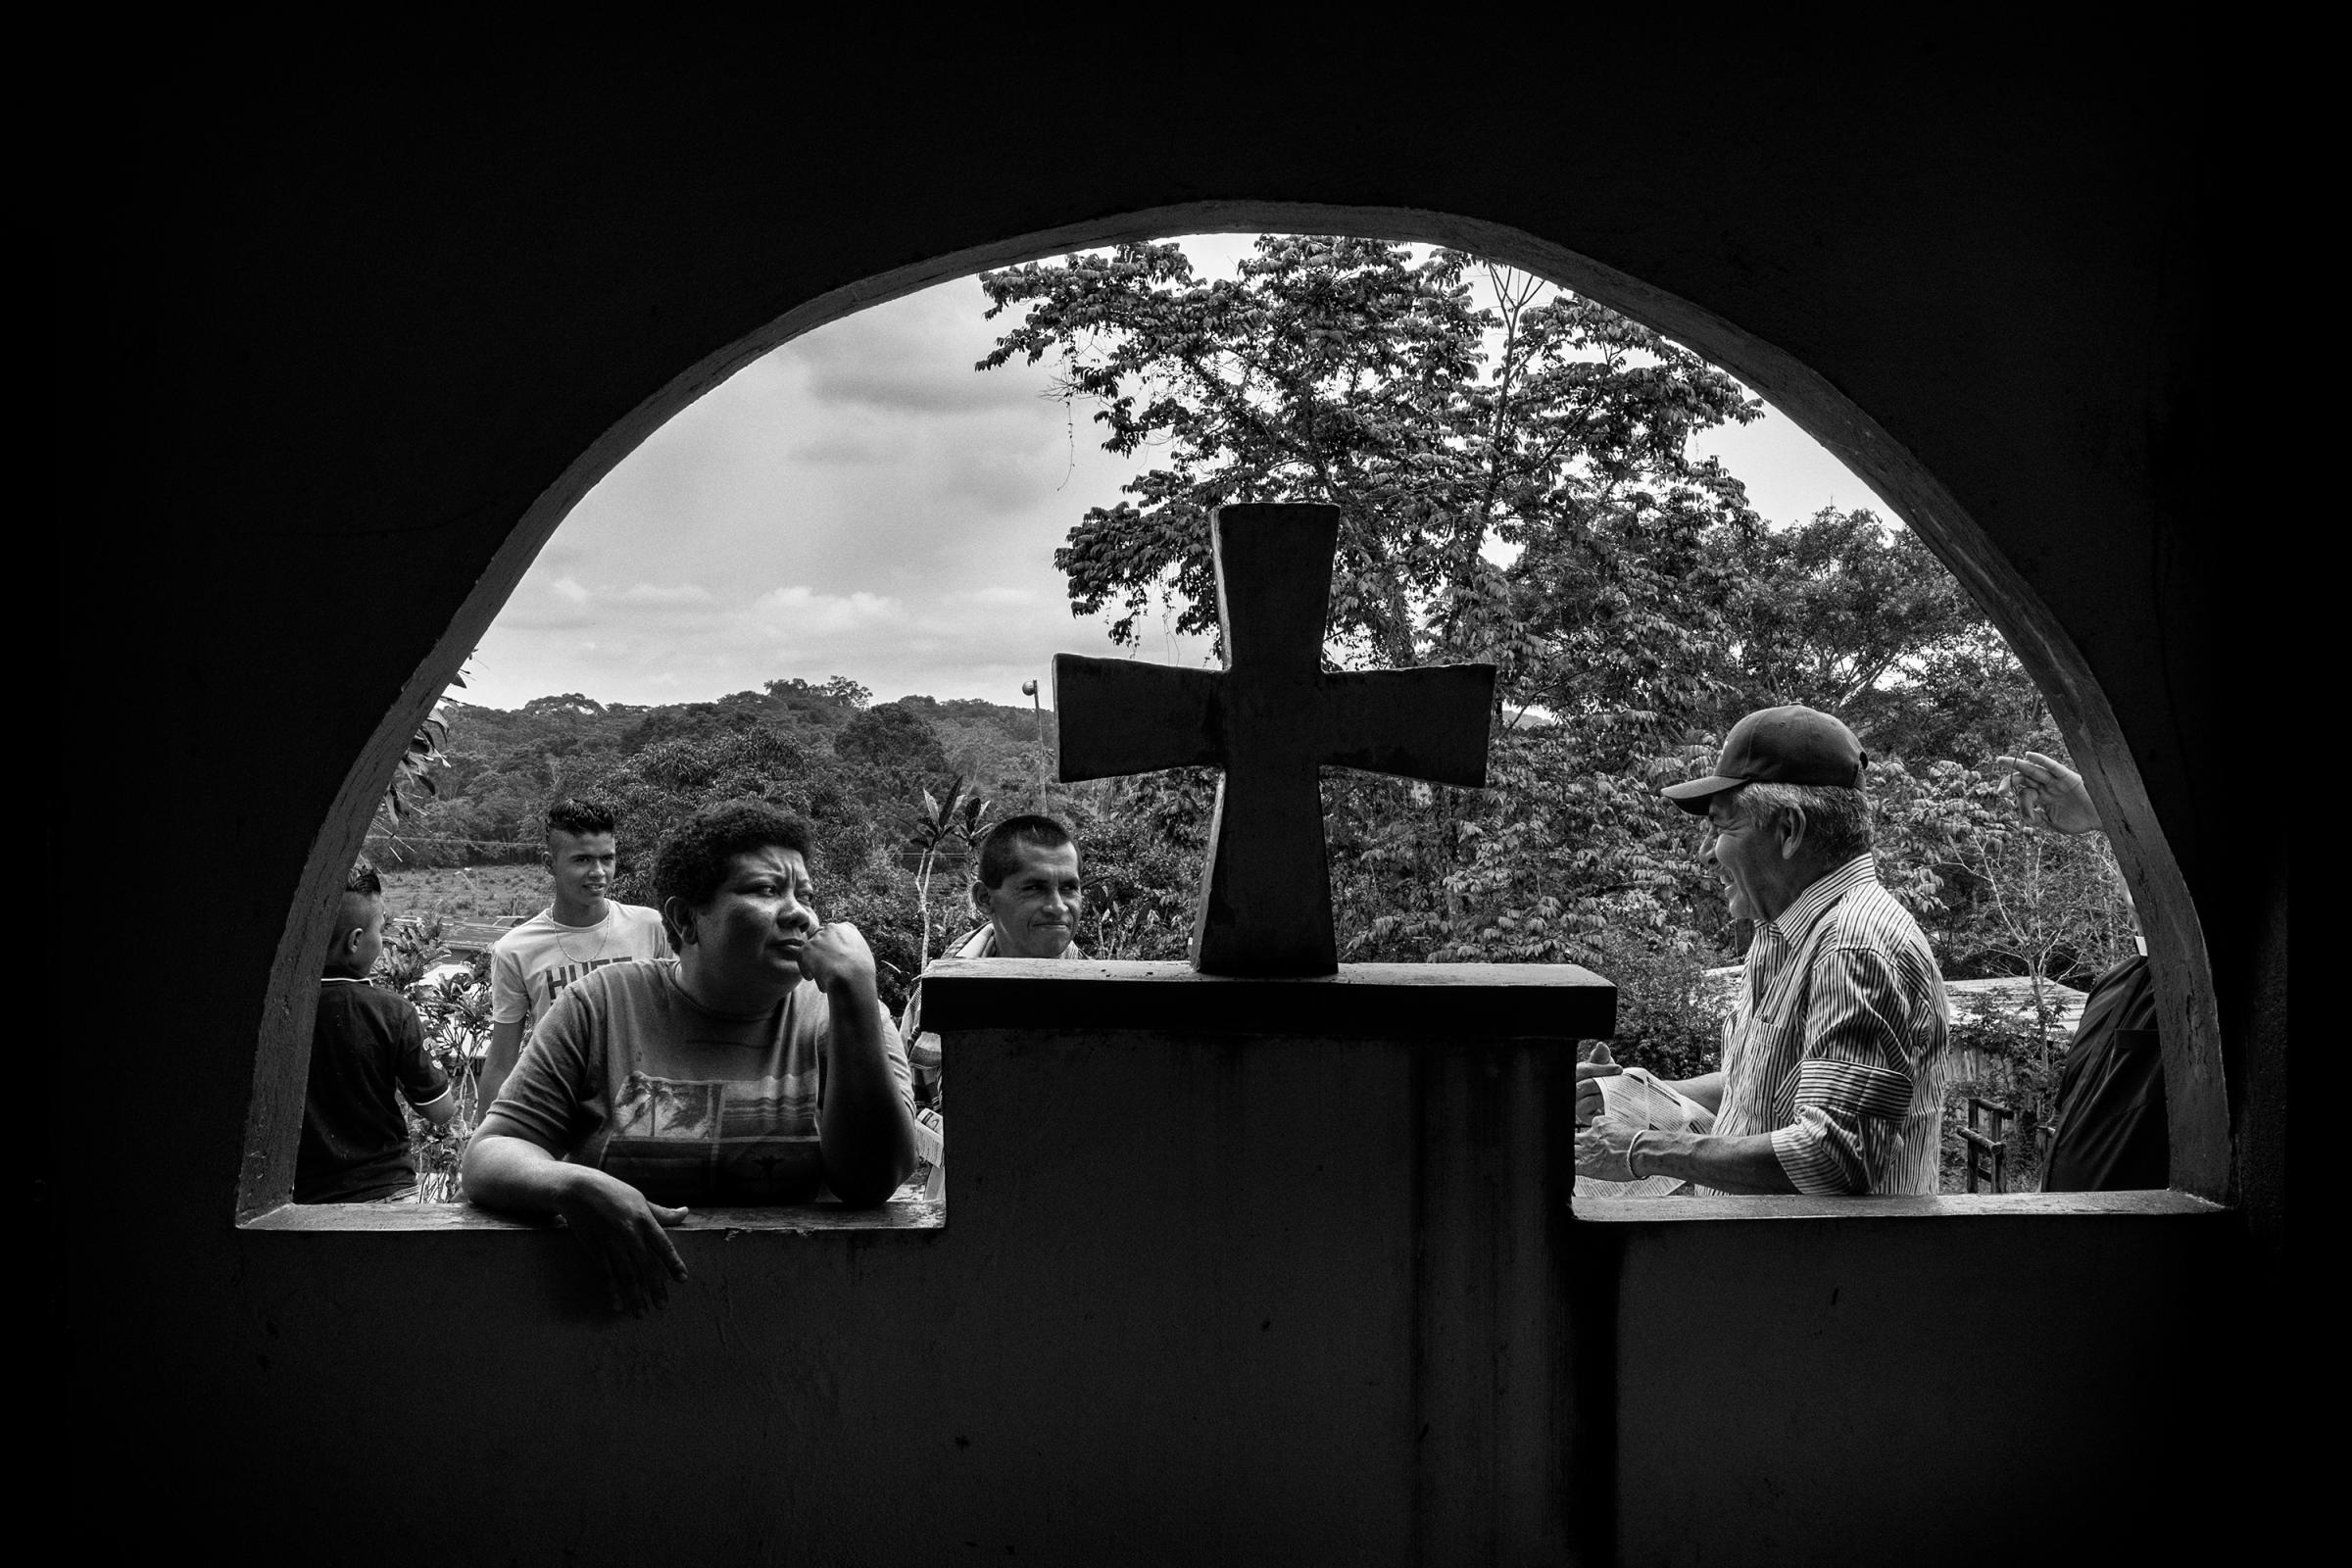 A group of civilians wait for a mass in the village of Puerto Camelias, Caqueta, Colombia, which is one of the villages under FARC guerrilla control, Caqueta region, March, 2016.